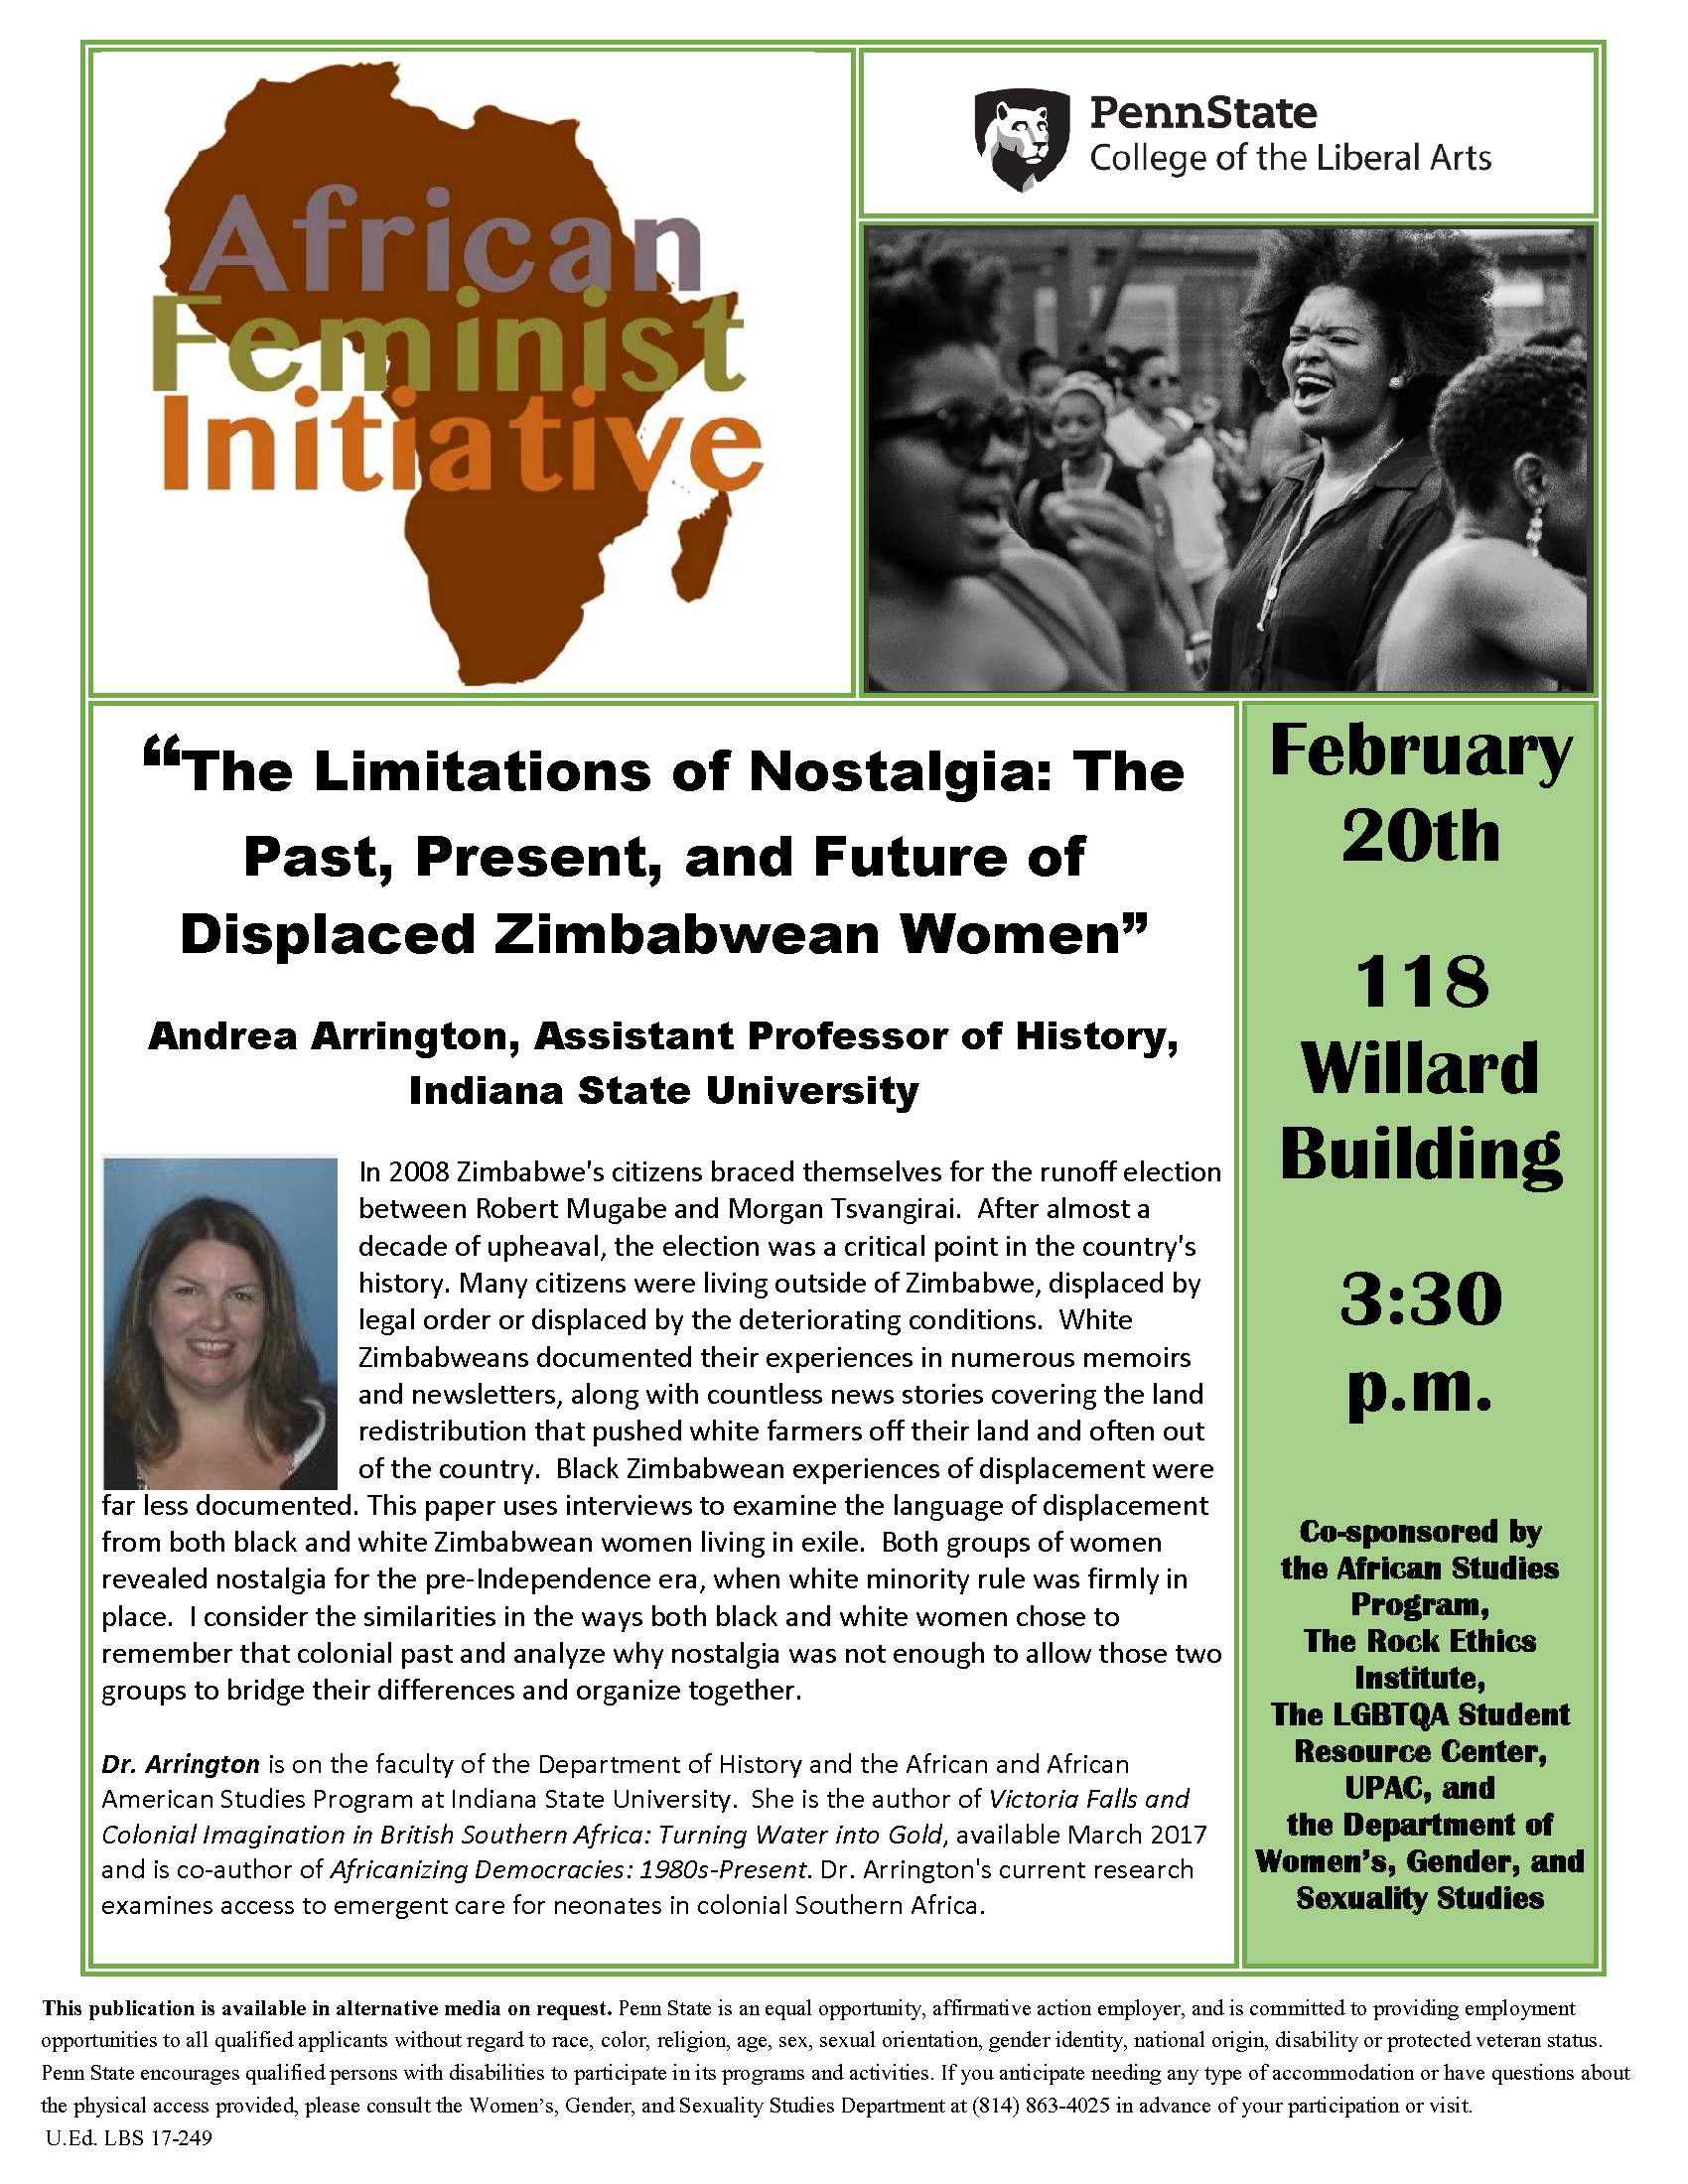 The Limitations of Nostalgia: The Past, Present, and Future of Displaced Zimbabwean Women - February 2016